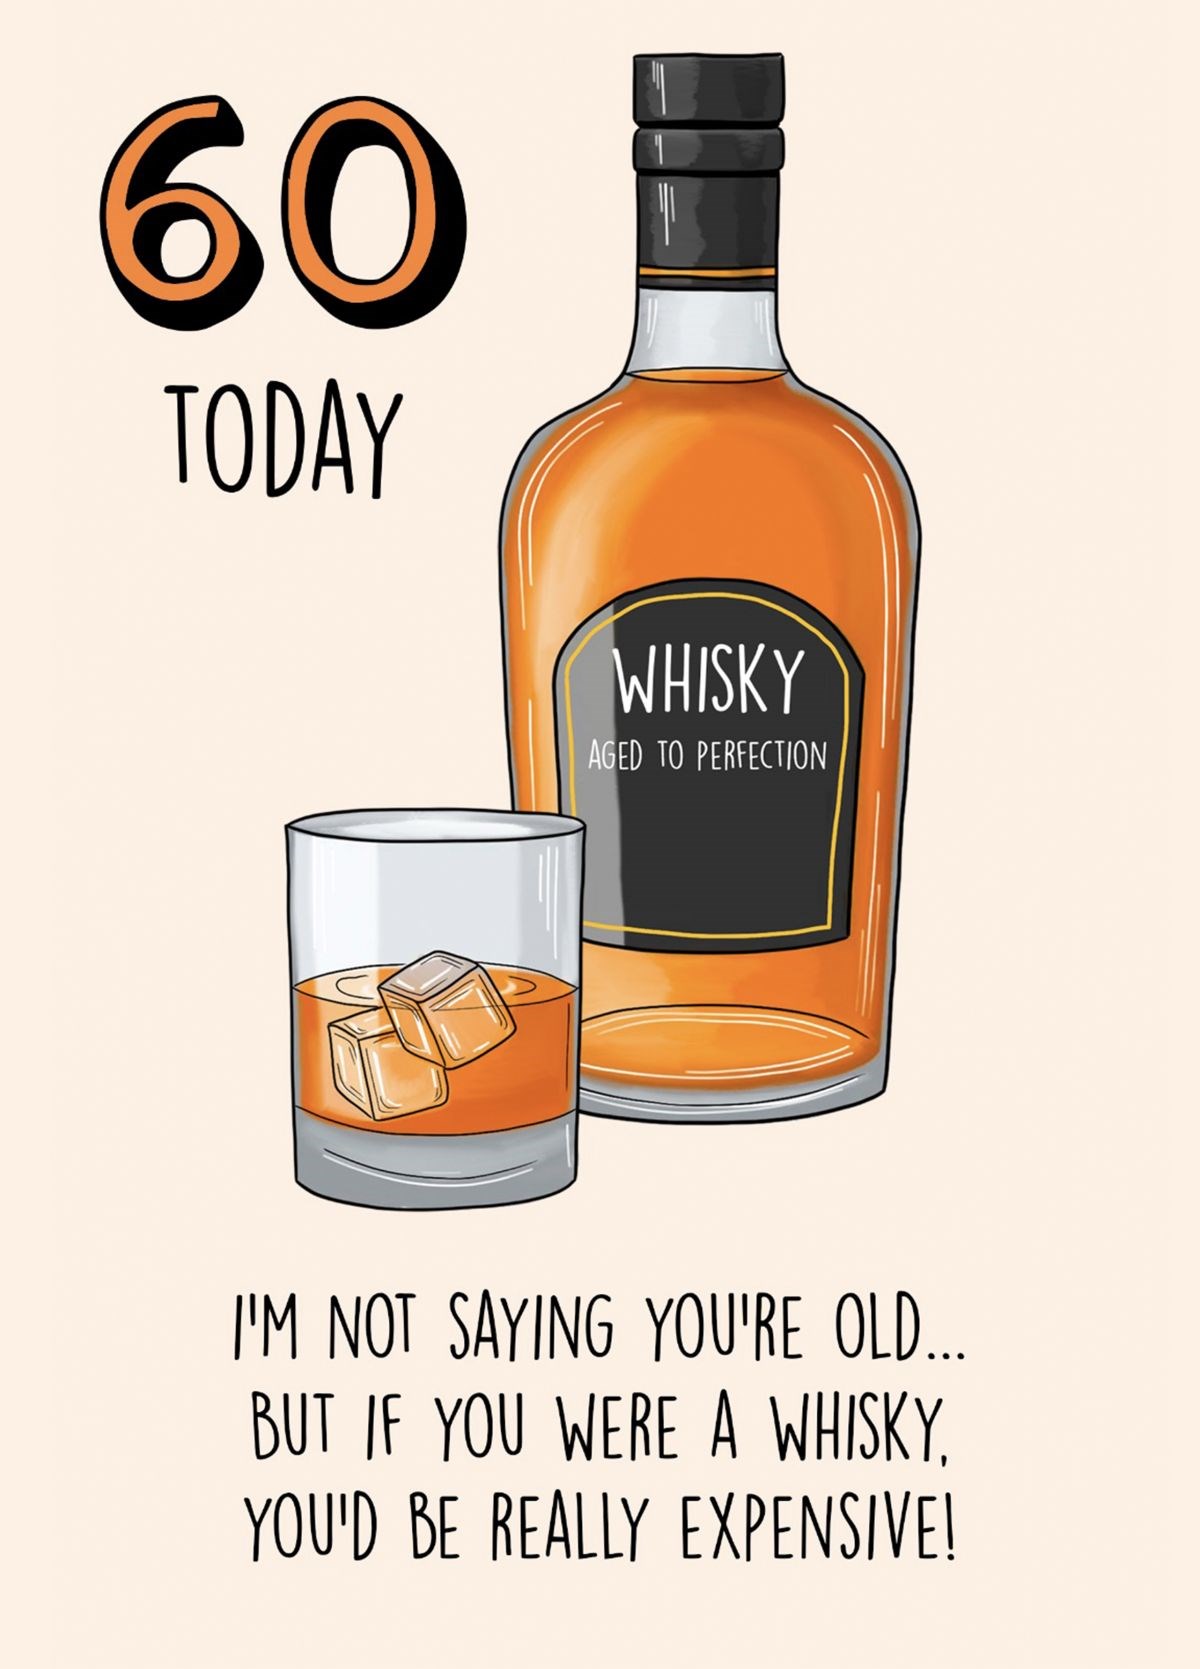 Traditional Classy Fashionable Lady "60 TODAY" Birthday Card 